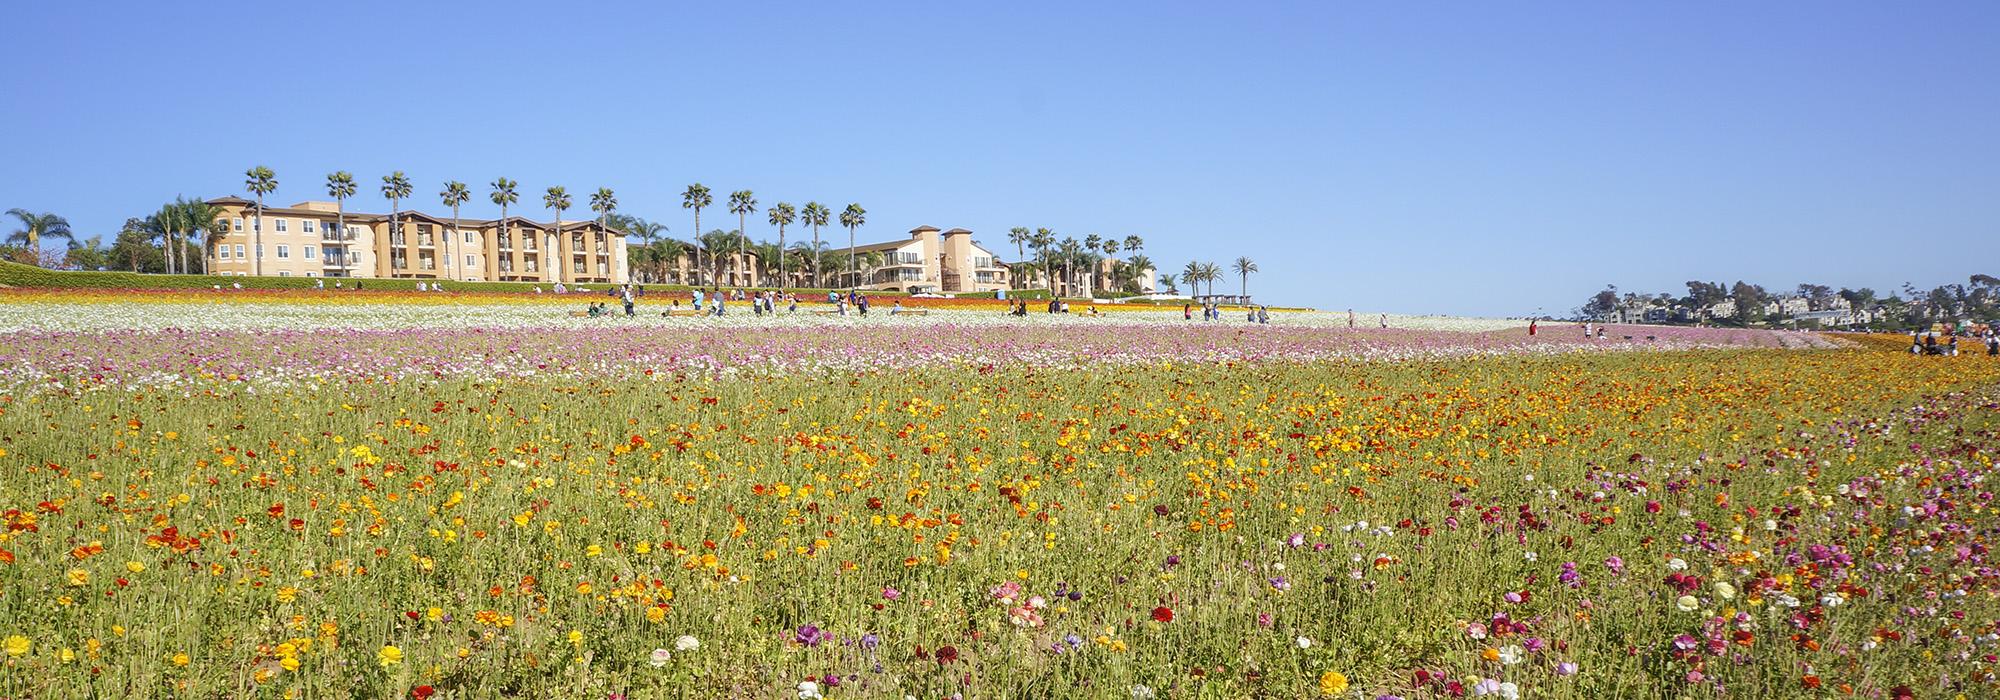 The Flower Fields at Carlsbad Ranch, San Diego, CA